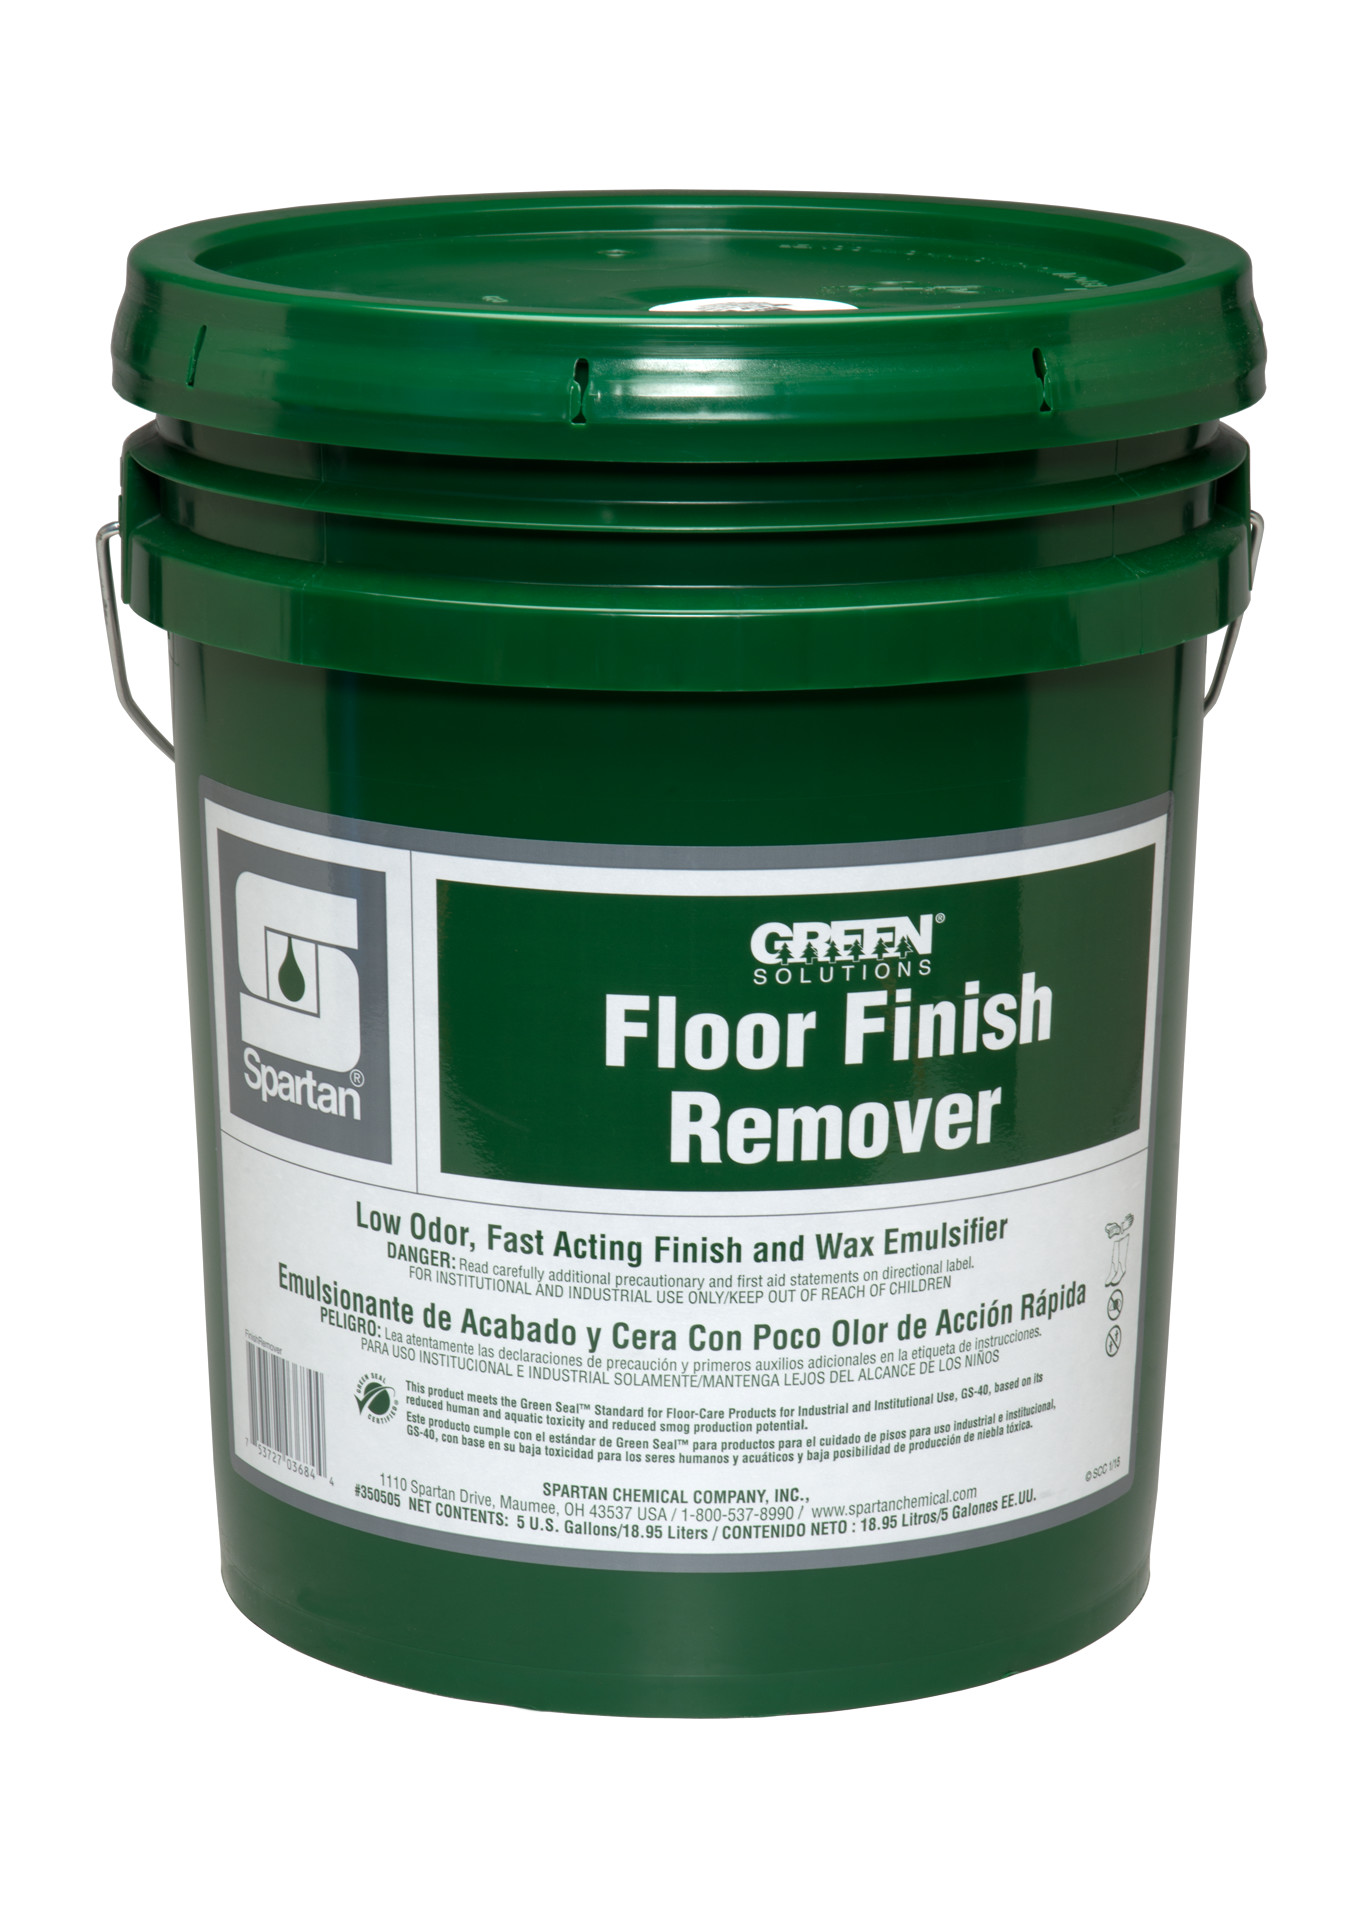 Spartan Chemical Company Green Solutions Floor Finish Remover, 5 GAL PAIL